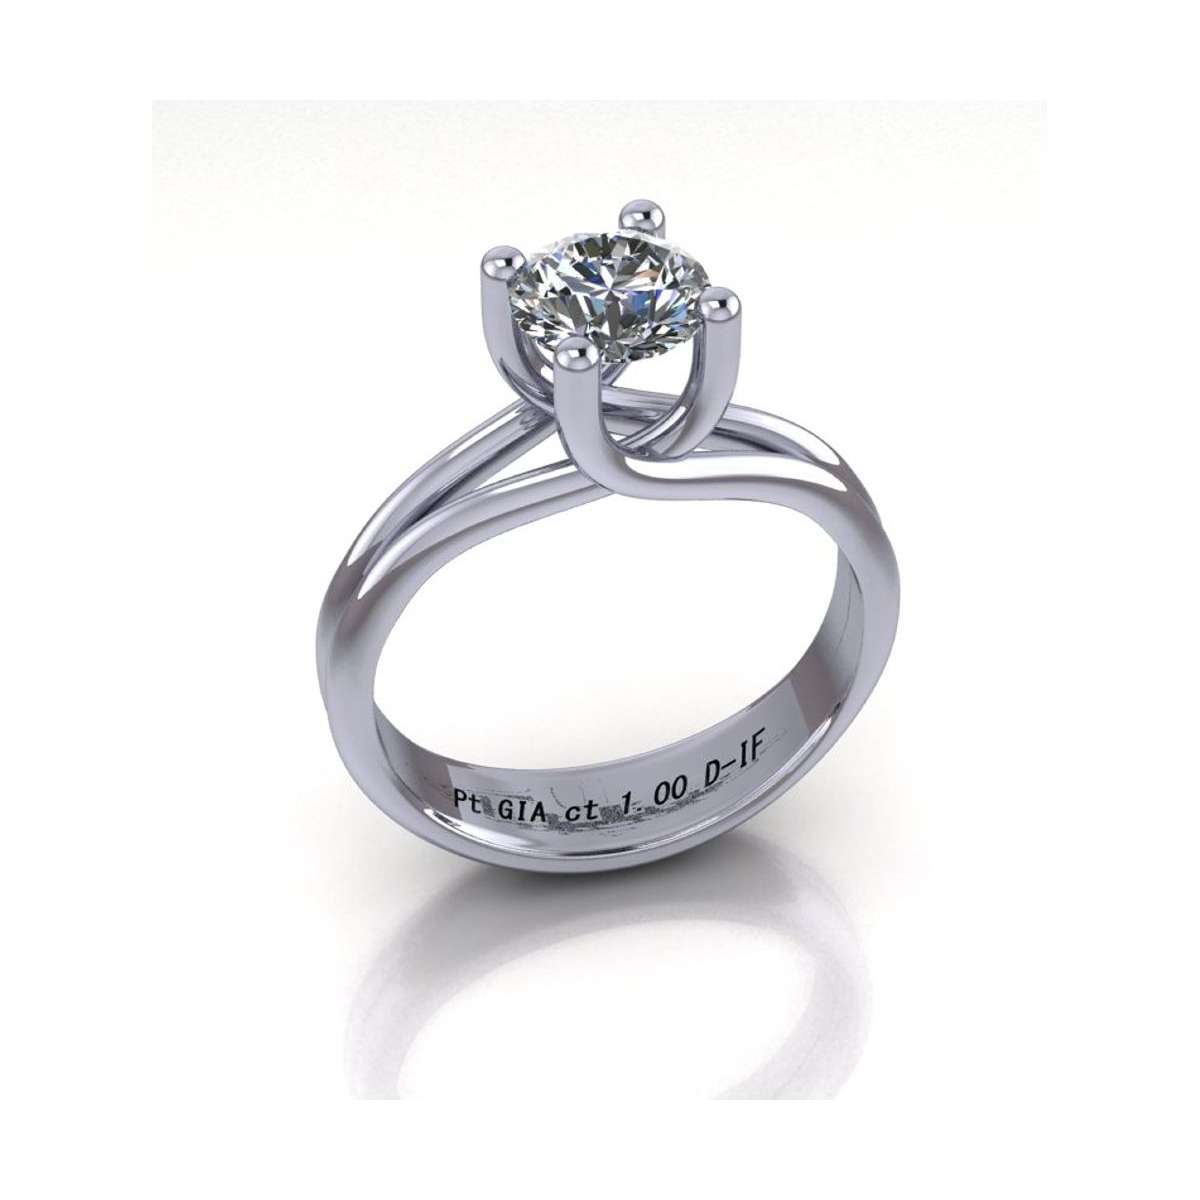 Platinum solitaire ring four claws GIA certified diamond 1.00 carats flawless D-IF